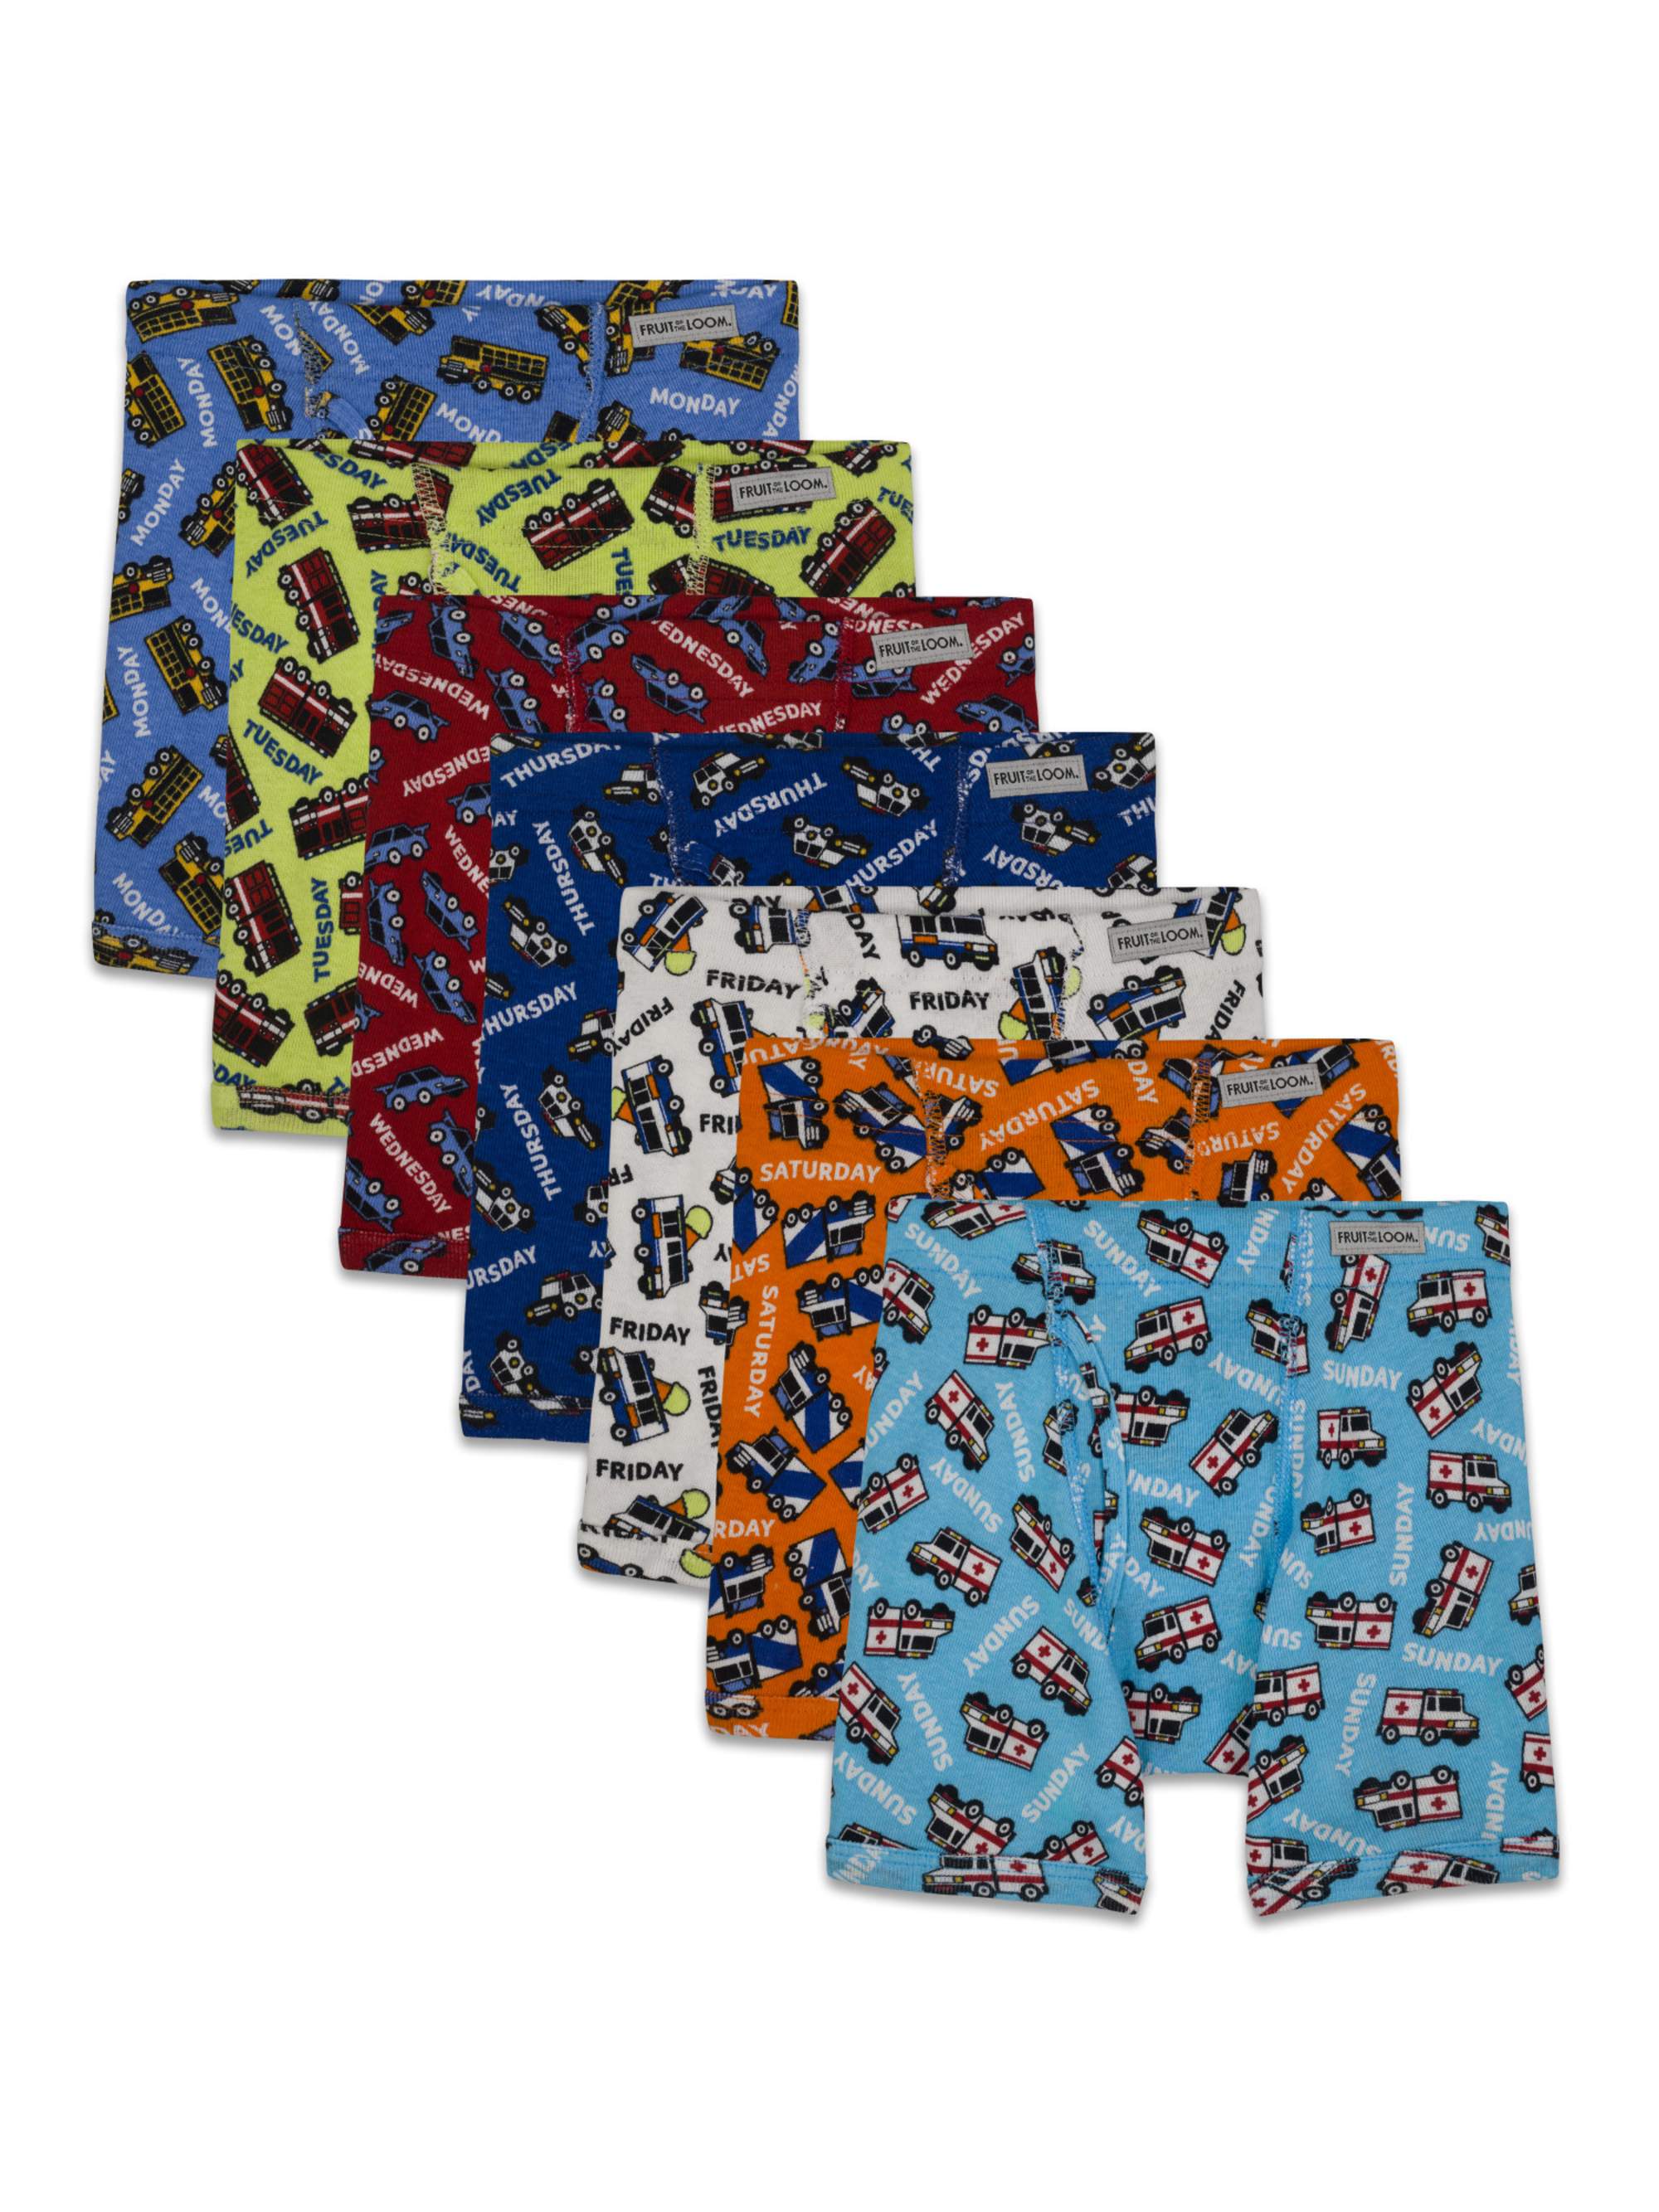 Fruit of the Loom Toddler Boy Boxer Briefs, 7 Pack, Sizes 2T-5T - image 1 of 4